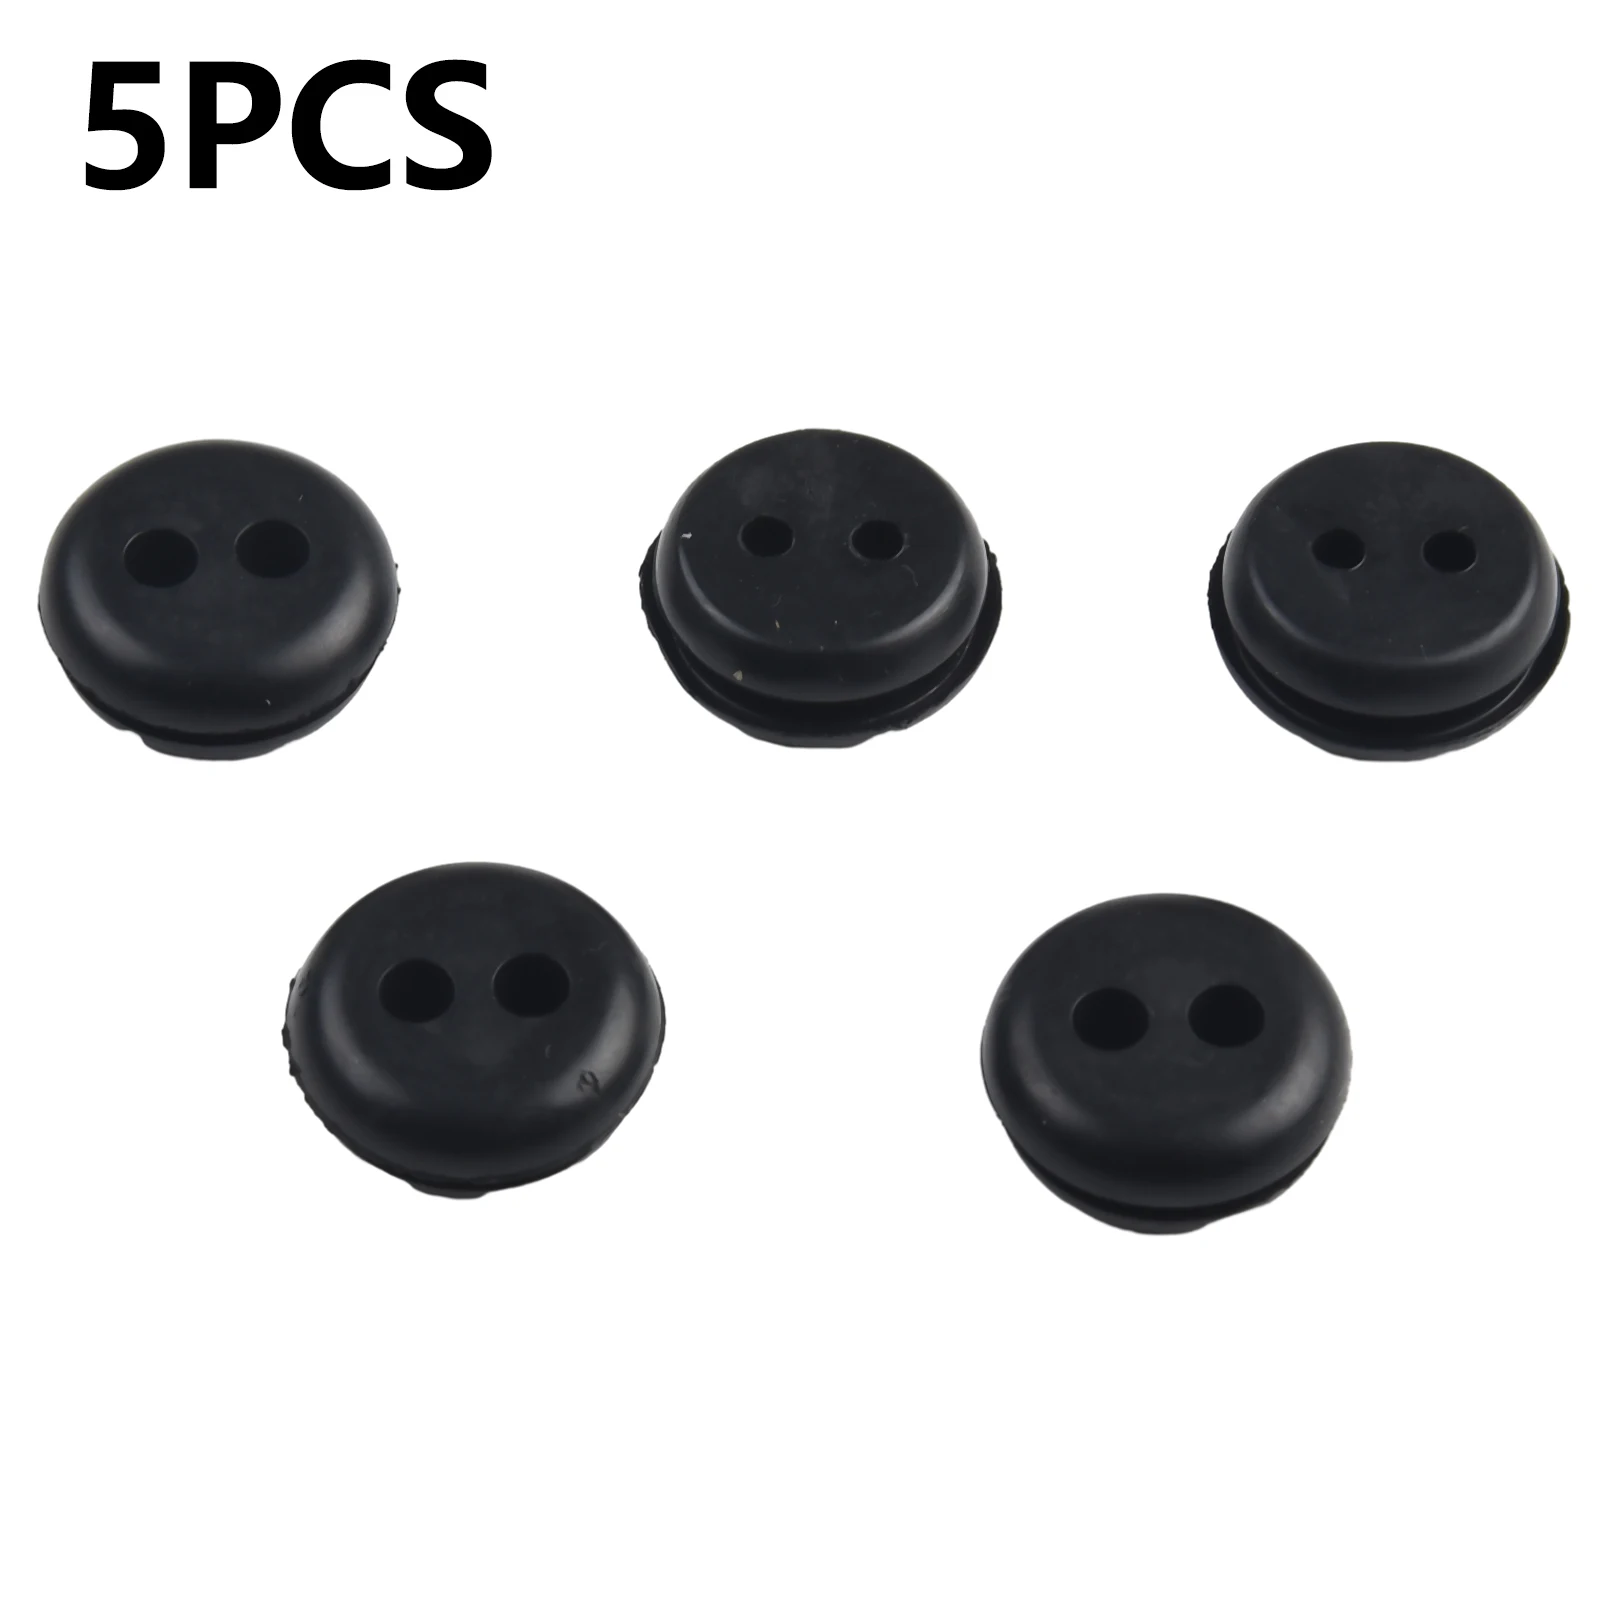 

5pcs 2-Hole For Stihl Trimmer Lawn Mower Rubber Grommets Fuel Gas Tank Grommet Replacement Parts ForTrimmer Brush Cutters